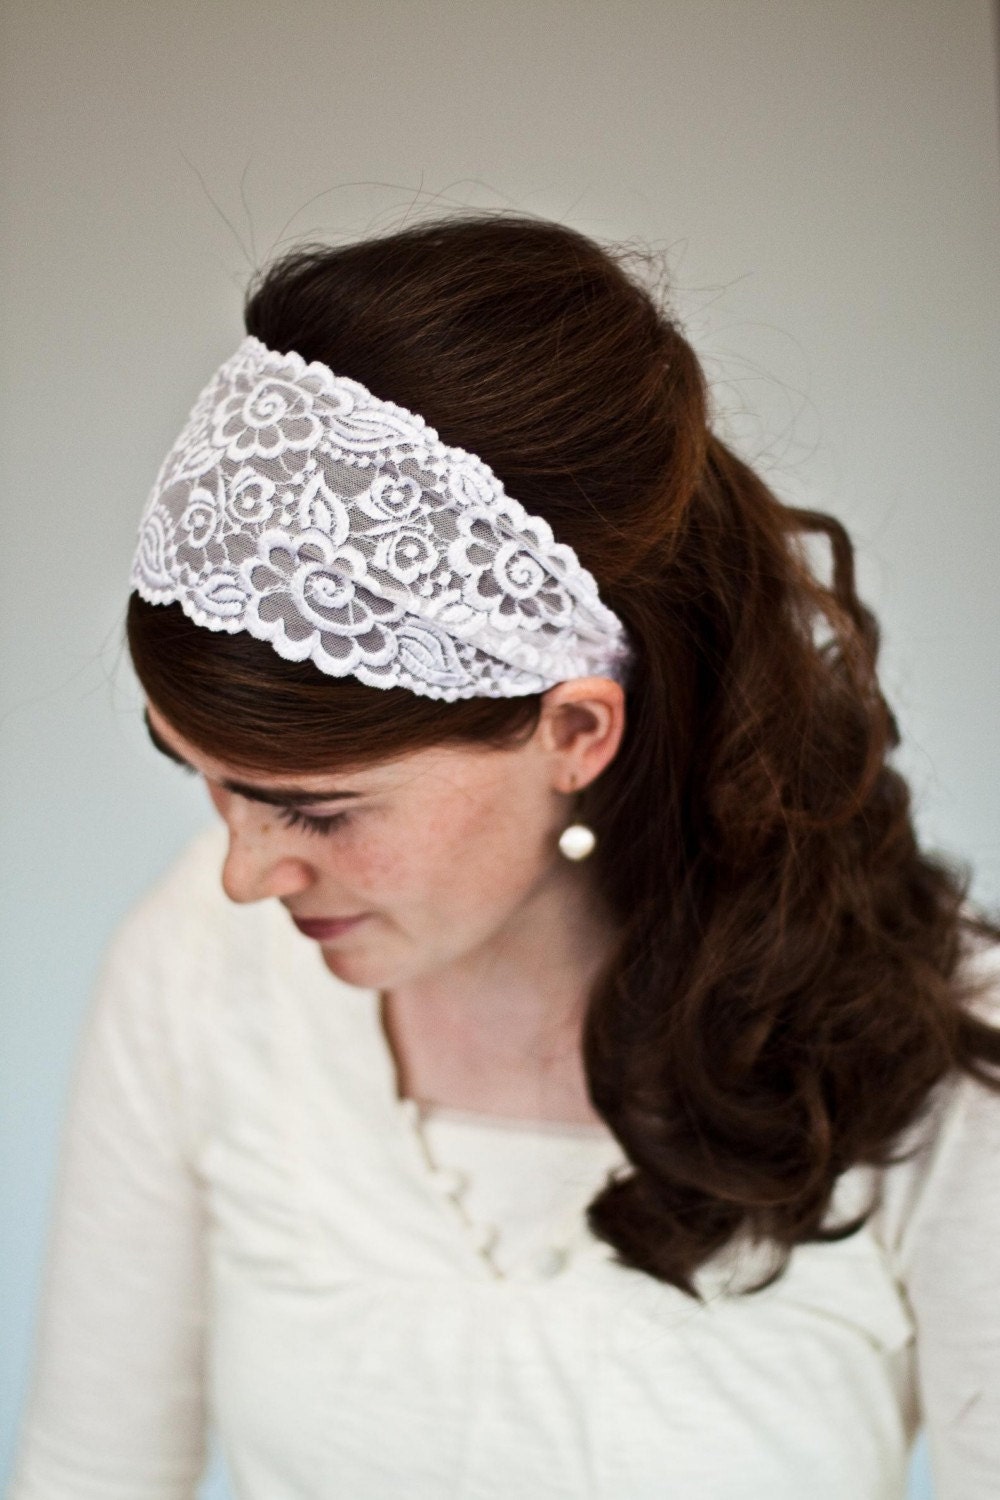 Stretch Lace headband hair band wedding veil scarf thick 4 colors to choose from